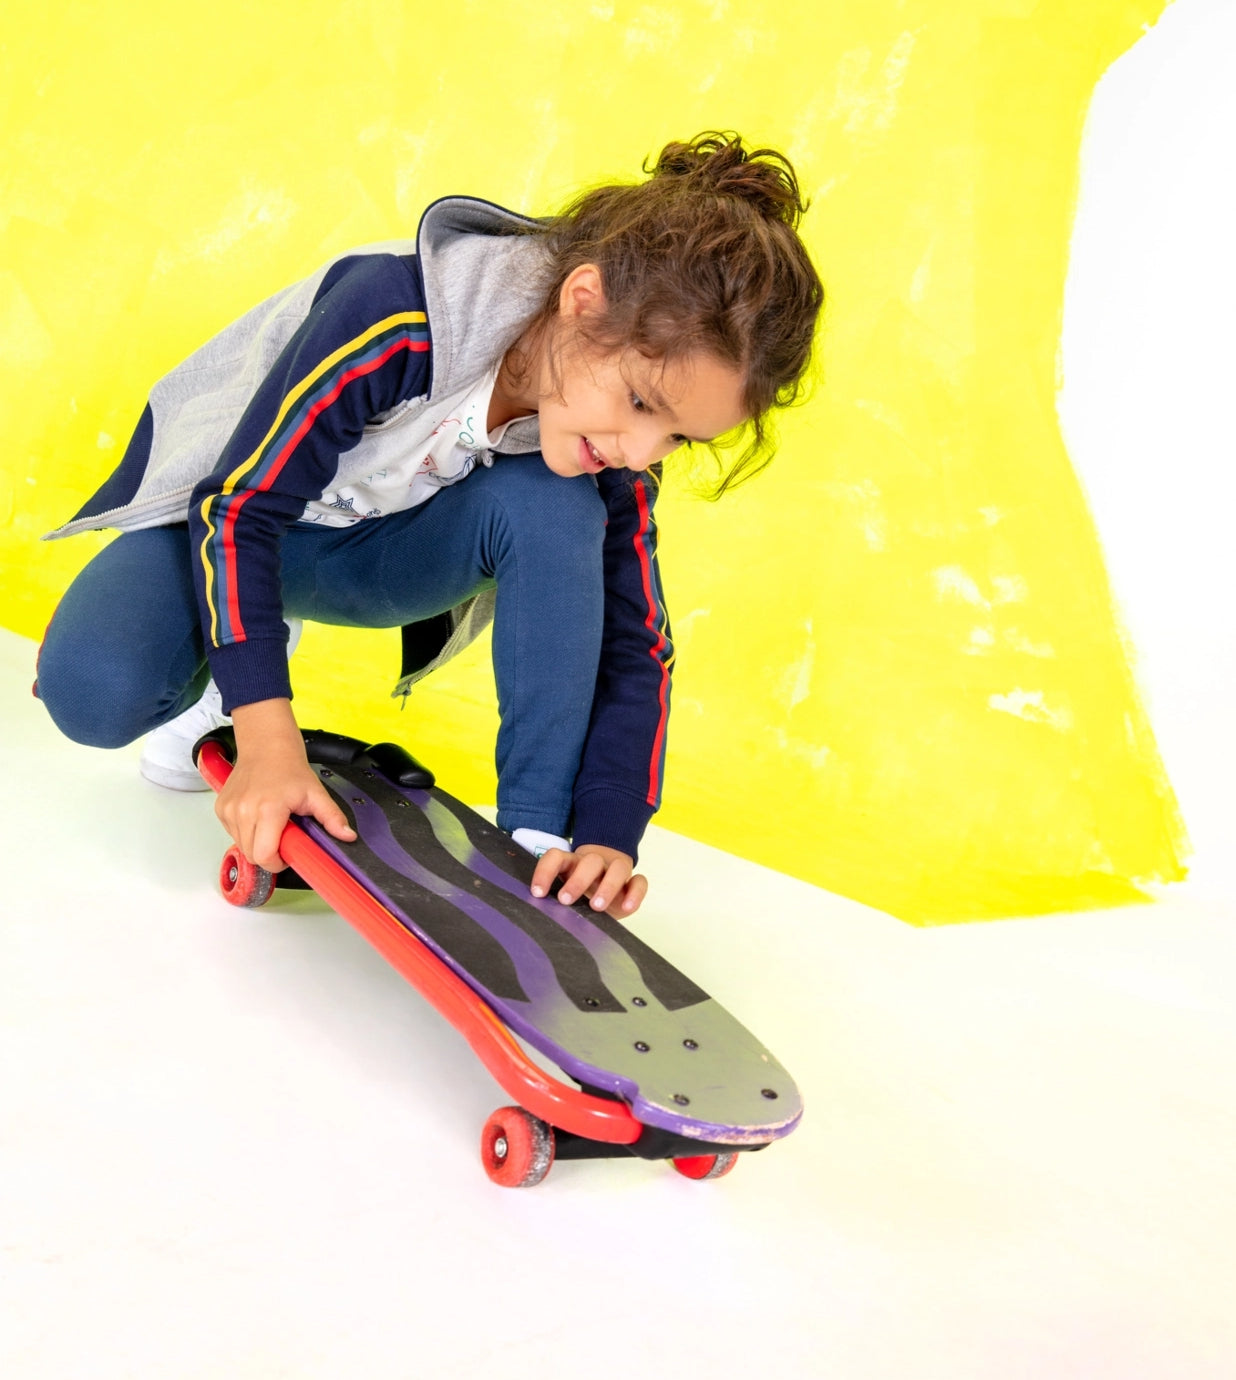 Kid playing with a skateboard wearing a multicolored jacket